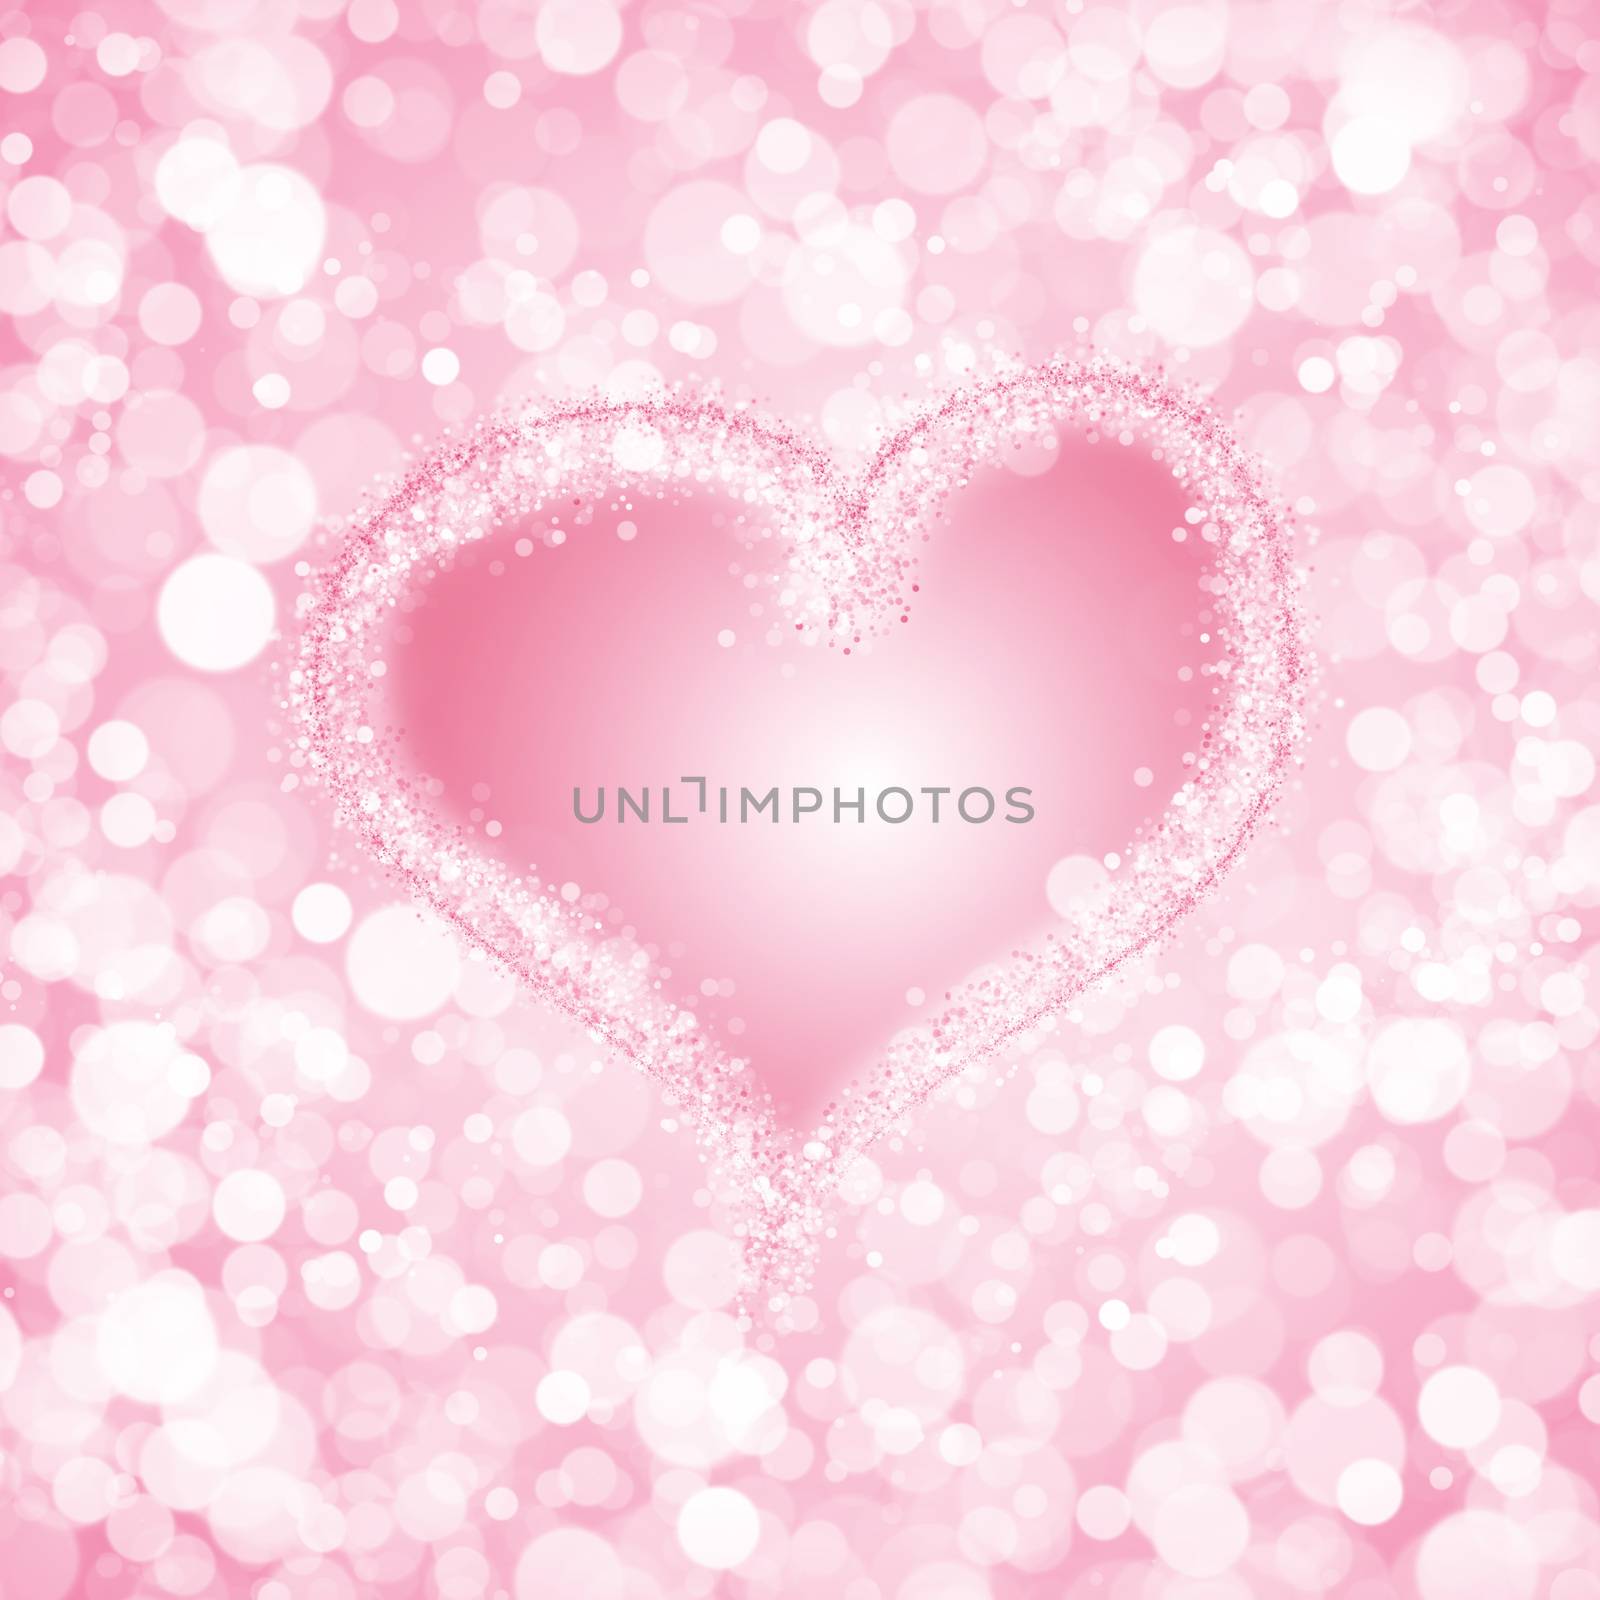 Pink glowing bokeh heart background for Valentines day